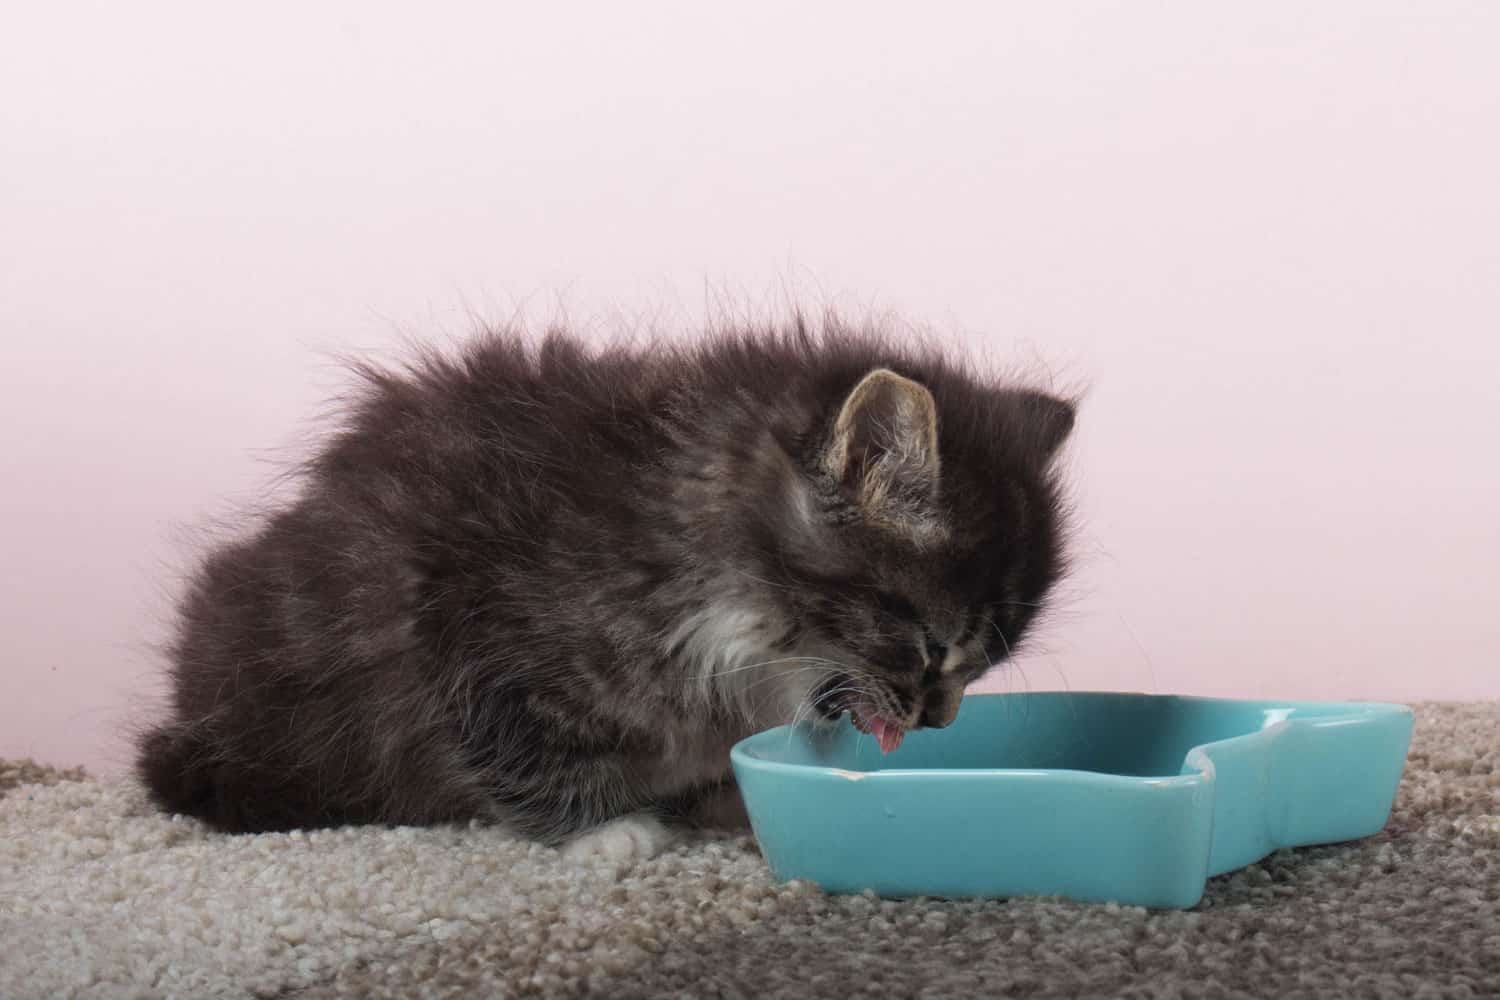 6 Week old long haired cat eating canned wet food on the floor from a dish. Baby cat making the transition from milk to soft food. The weaning process in kitten care.
